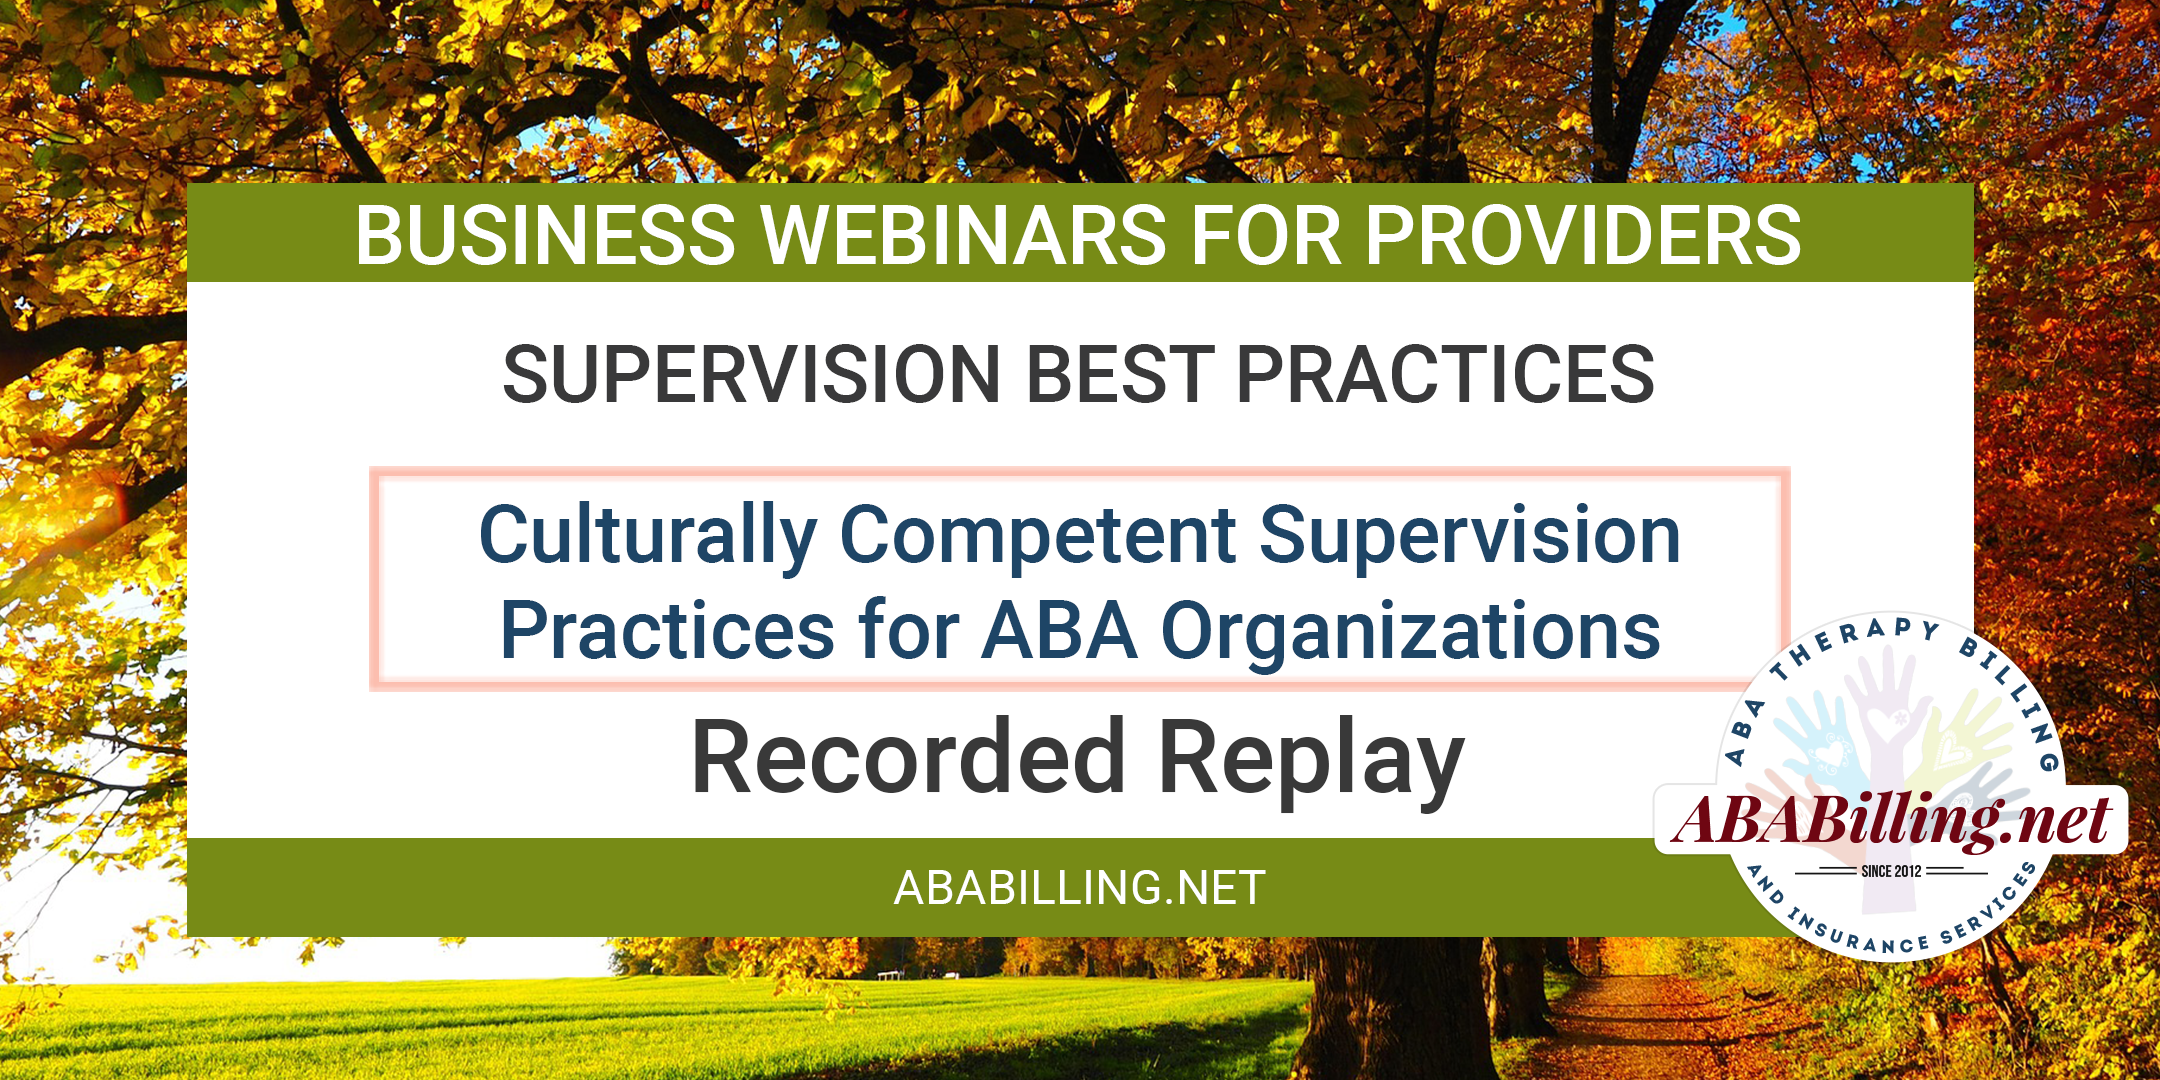 Webinar: Culturally Competent Supervision Practices for ABA Organizations